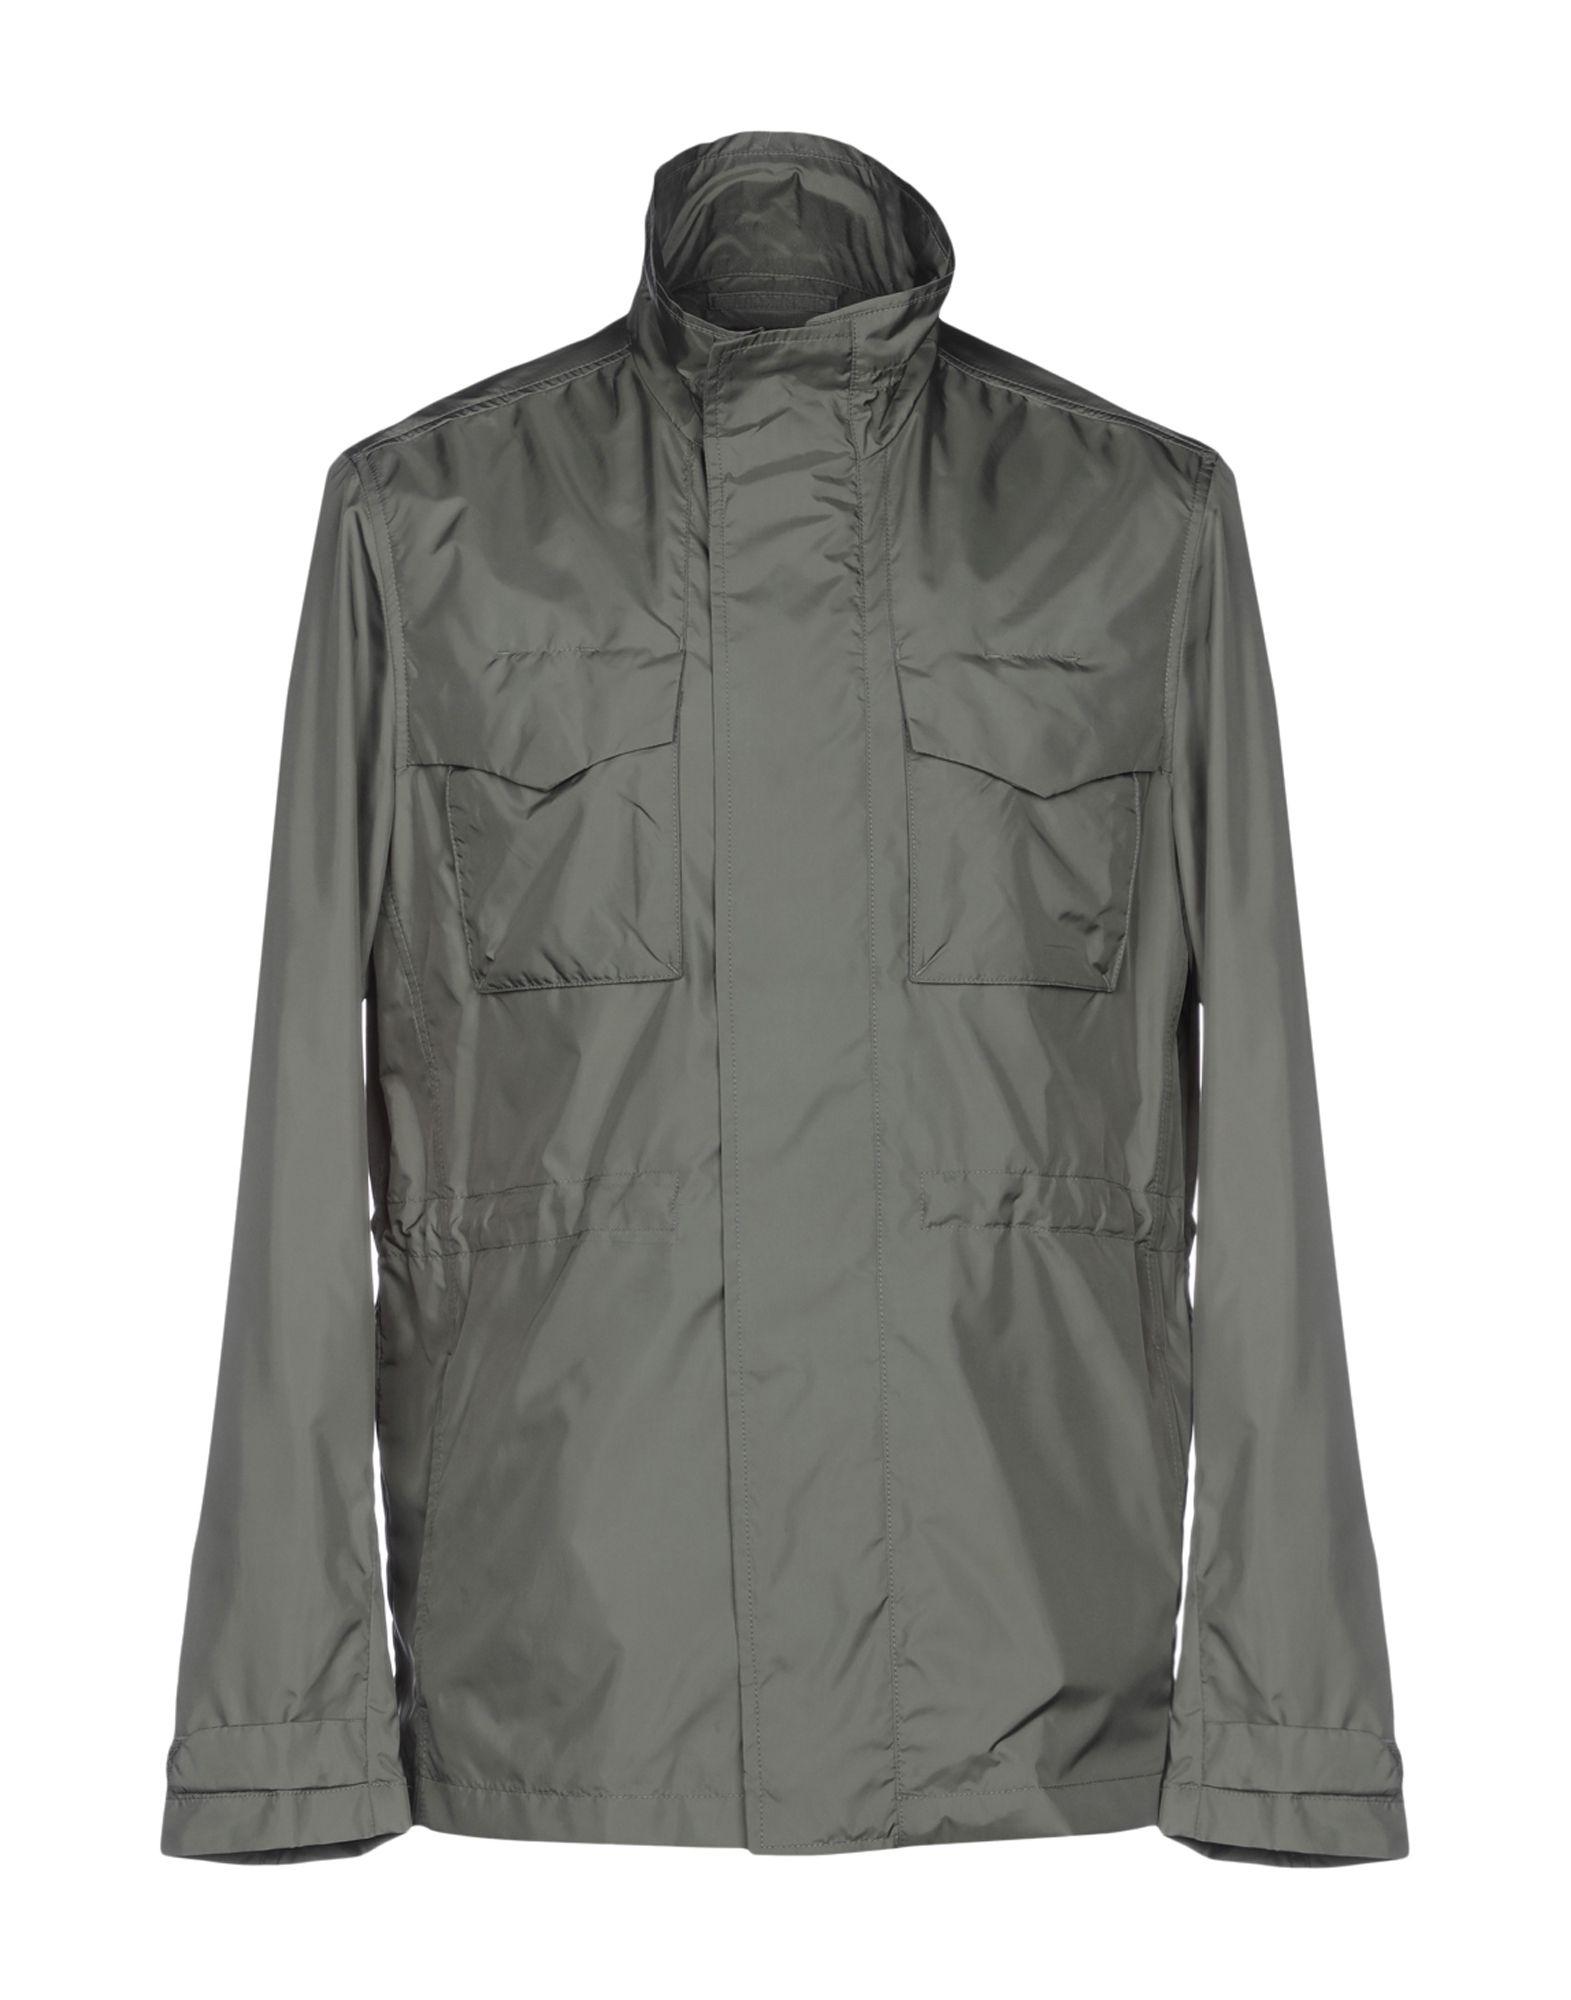 Michael Kors Synthetic Jacket in Military Green (Green) for Men - Lyst